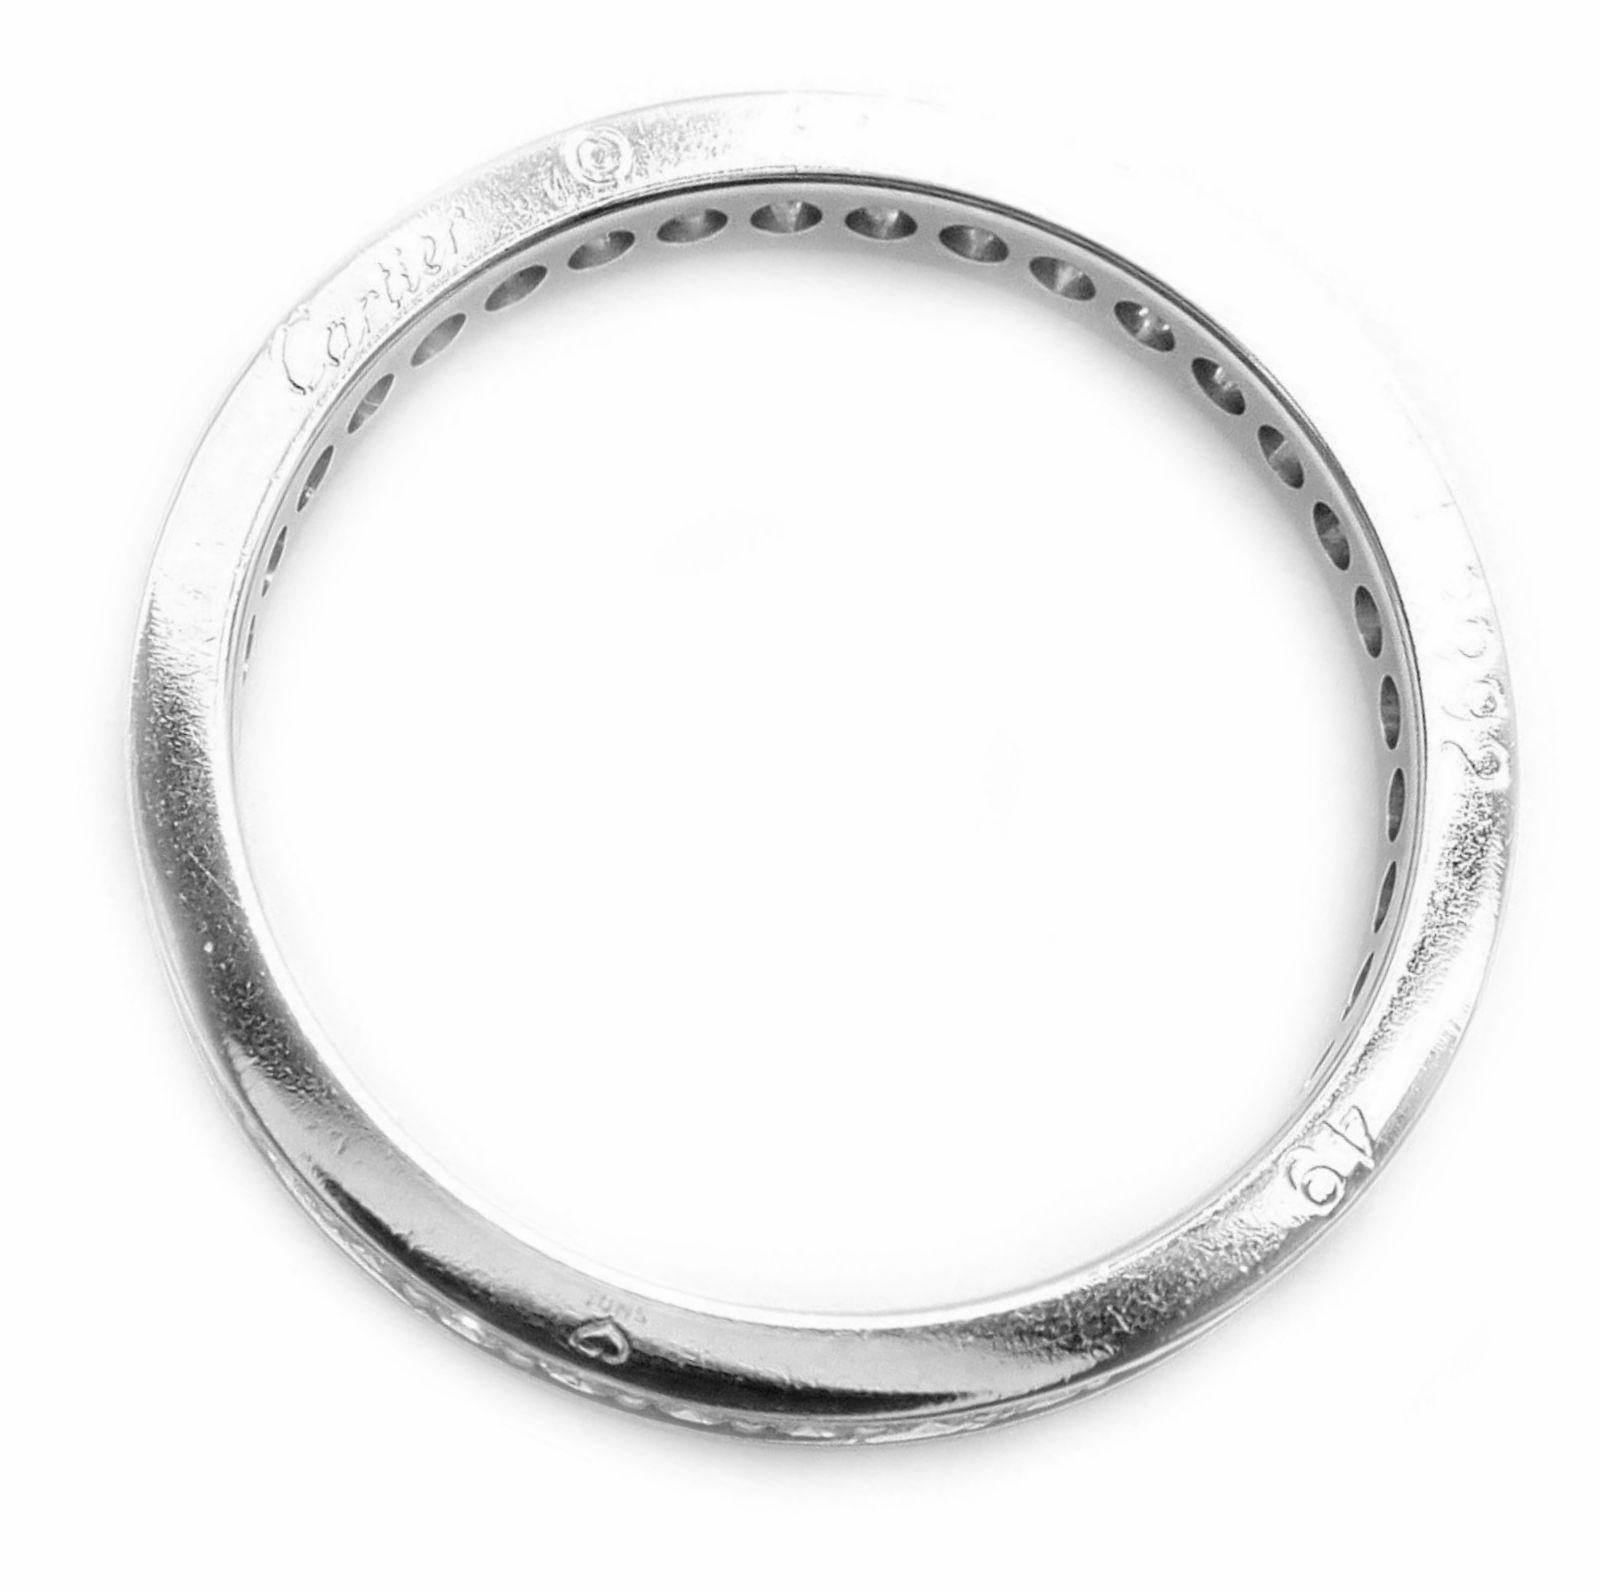 Cartier Diamond Eternity Platinum Band Ring In New Condition For Sale In Holland, PA